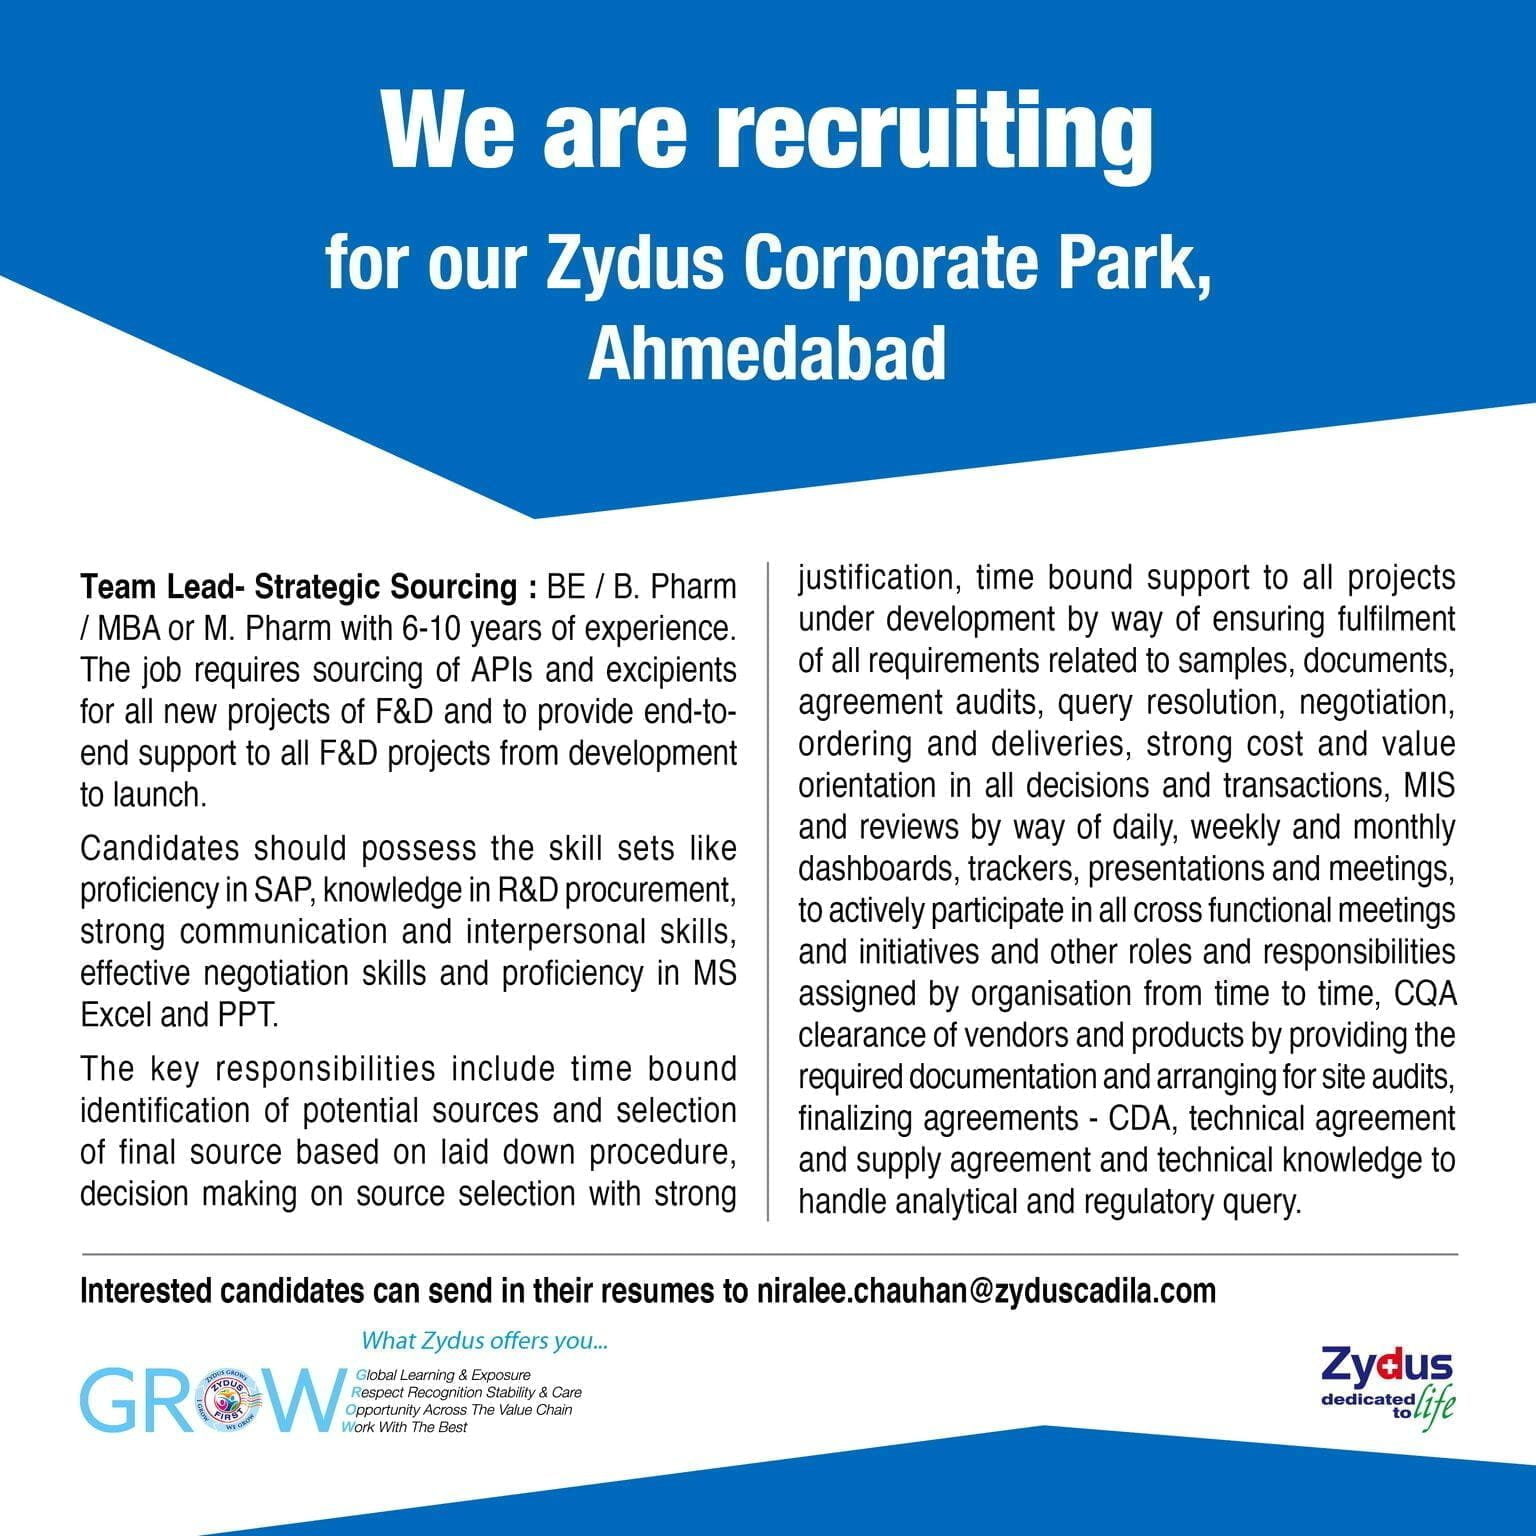 Zydus Recruitment Pharmacy Candidates for Team Lead Strategic Sourcing Role 2022